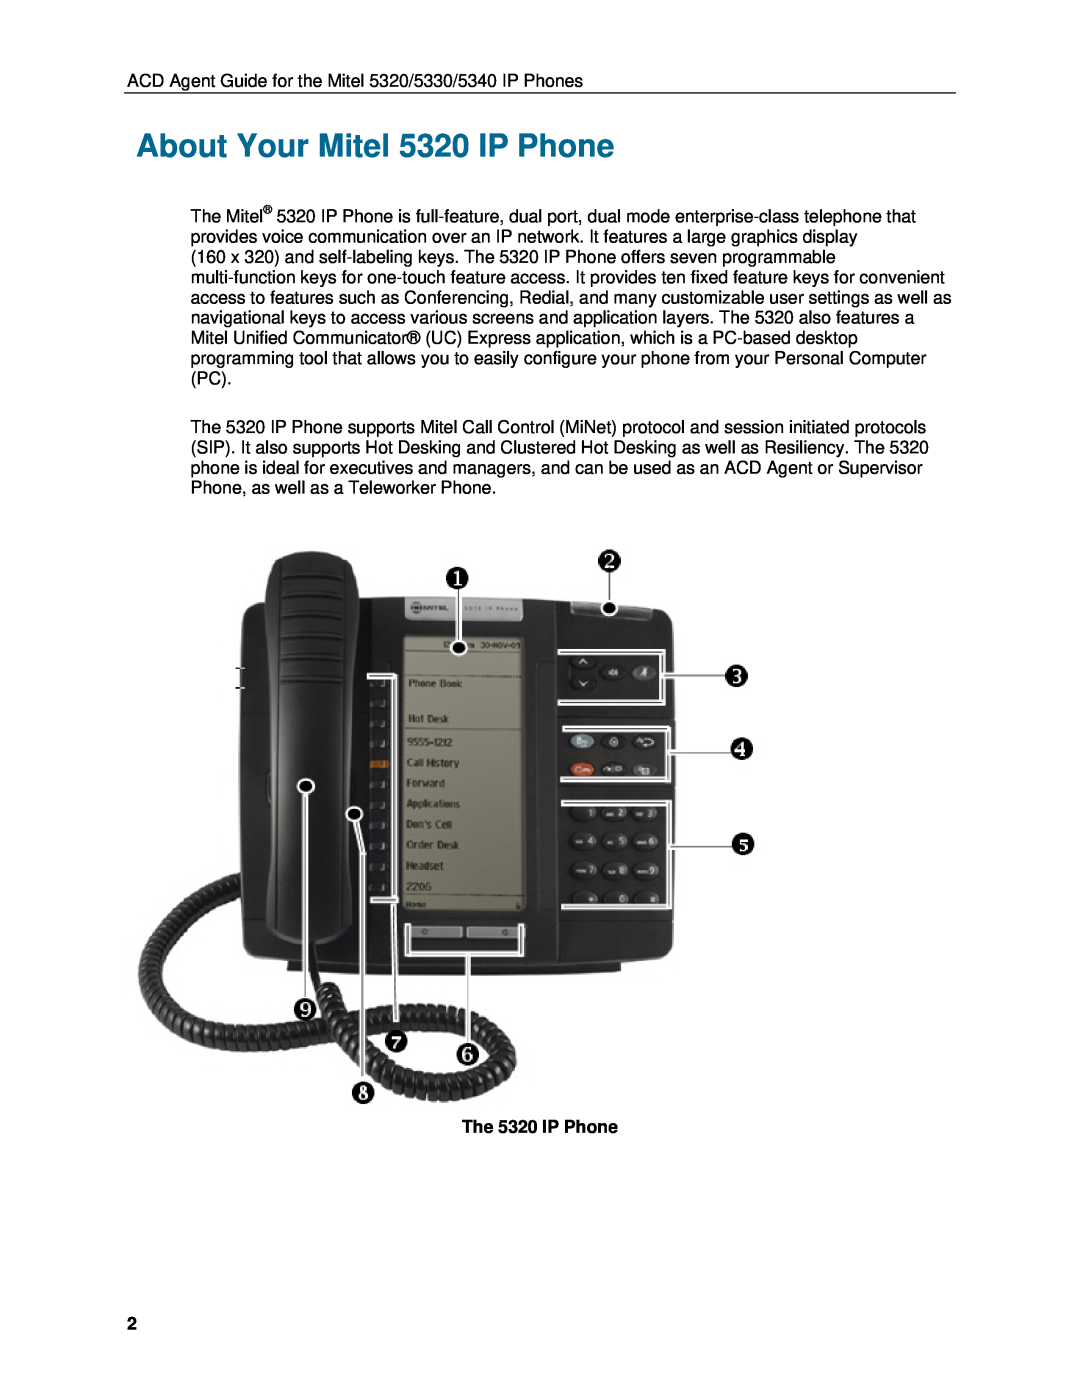 Mitel 5340, 5330 manual About Your Mitel 5320 IP Phone, The 5320 IP Phone 